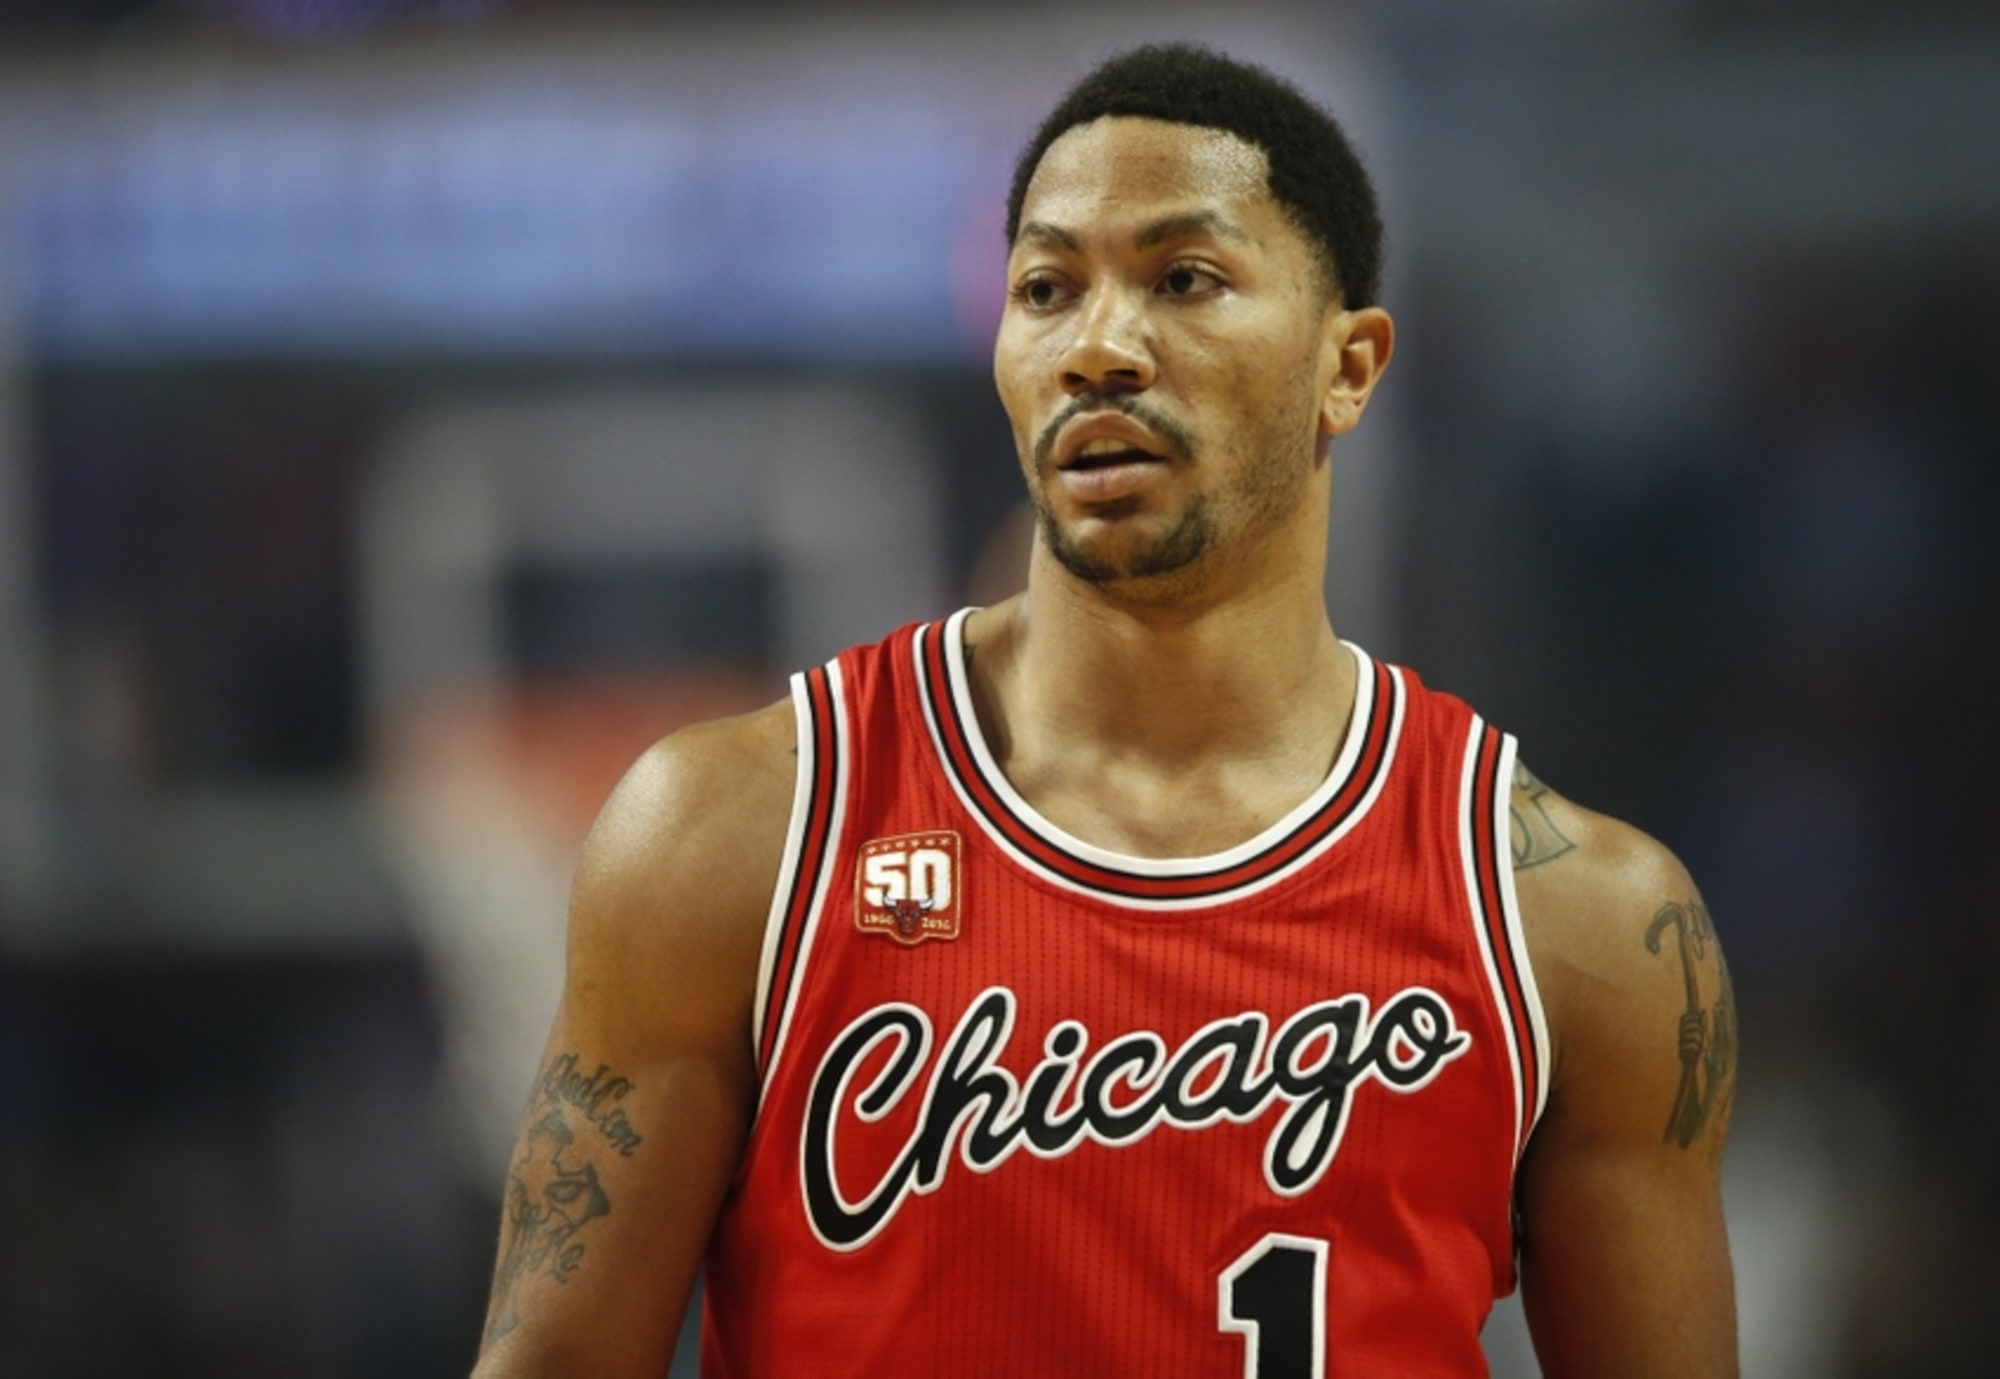 Derrick Rose's first introduction at home since injury 